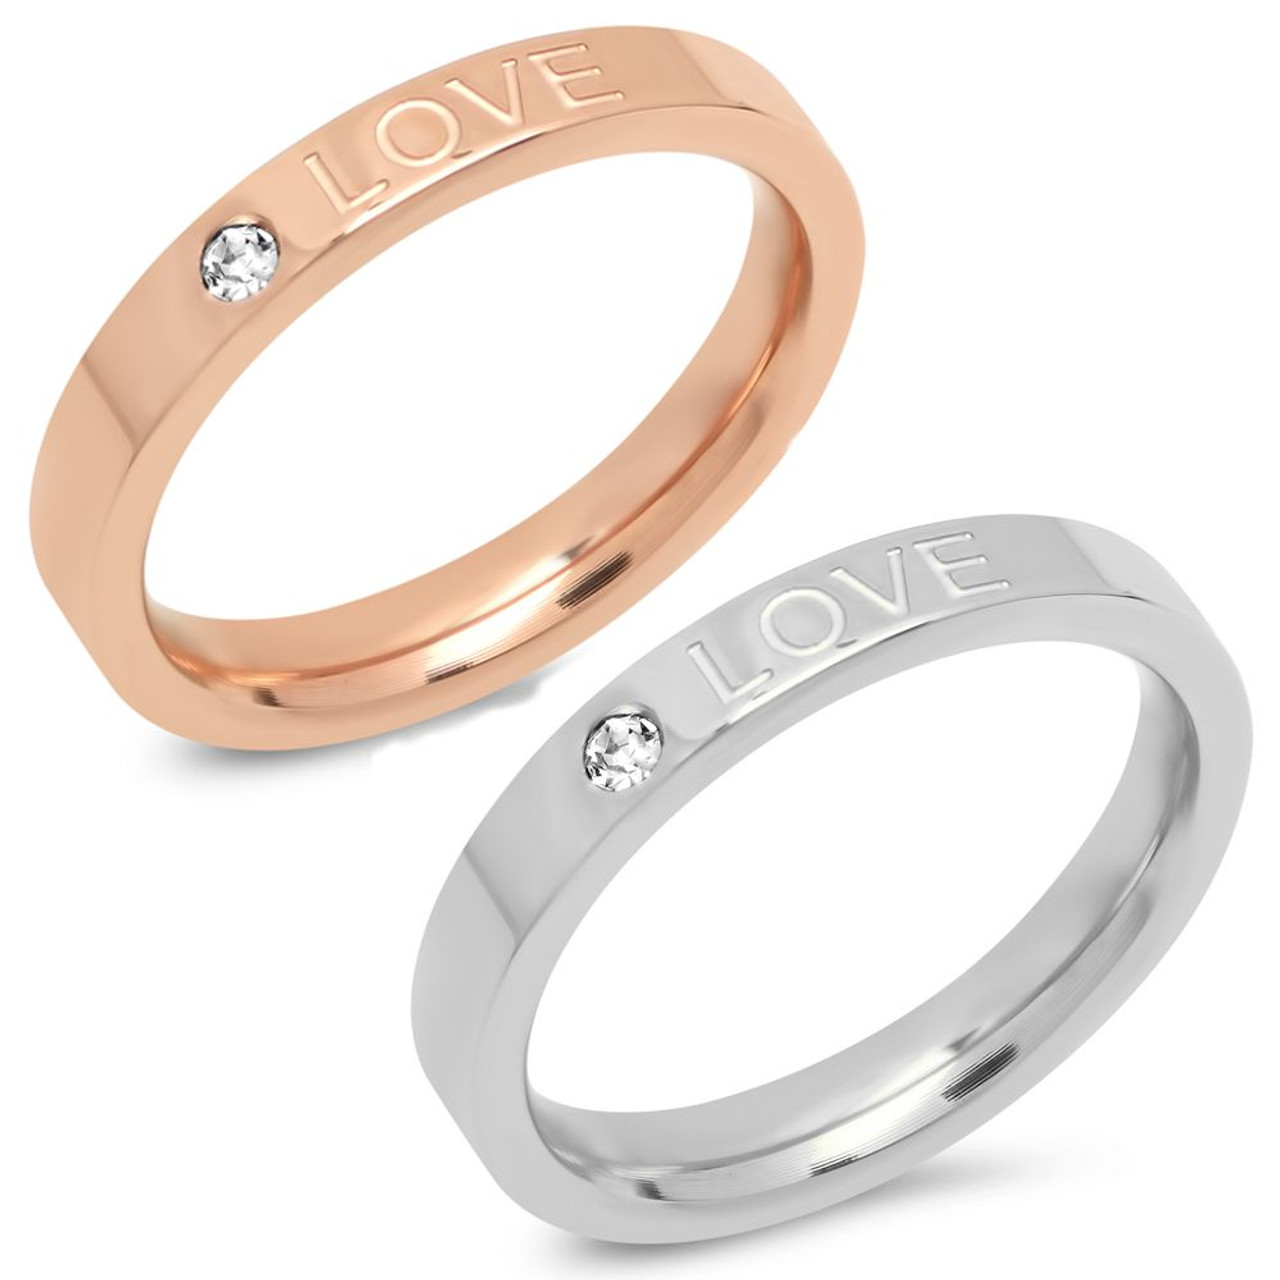 Real Love Couple Gold Ring Set Large CZ Zircon Gold Filled Wedding And  Engagement Rings For Men And Women From Mkhog, $15.82 | DHgate.Com